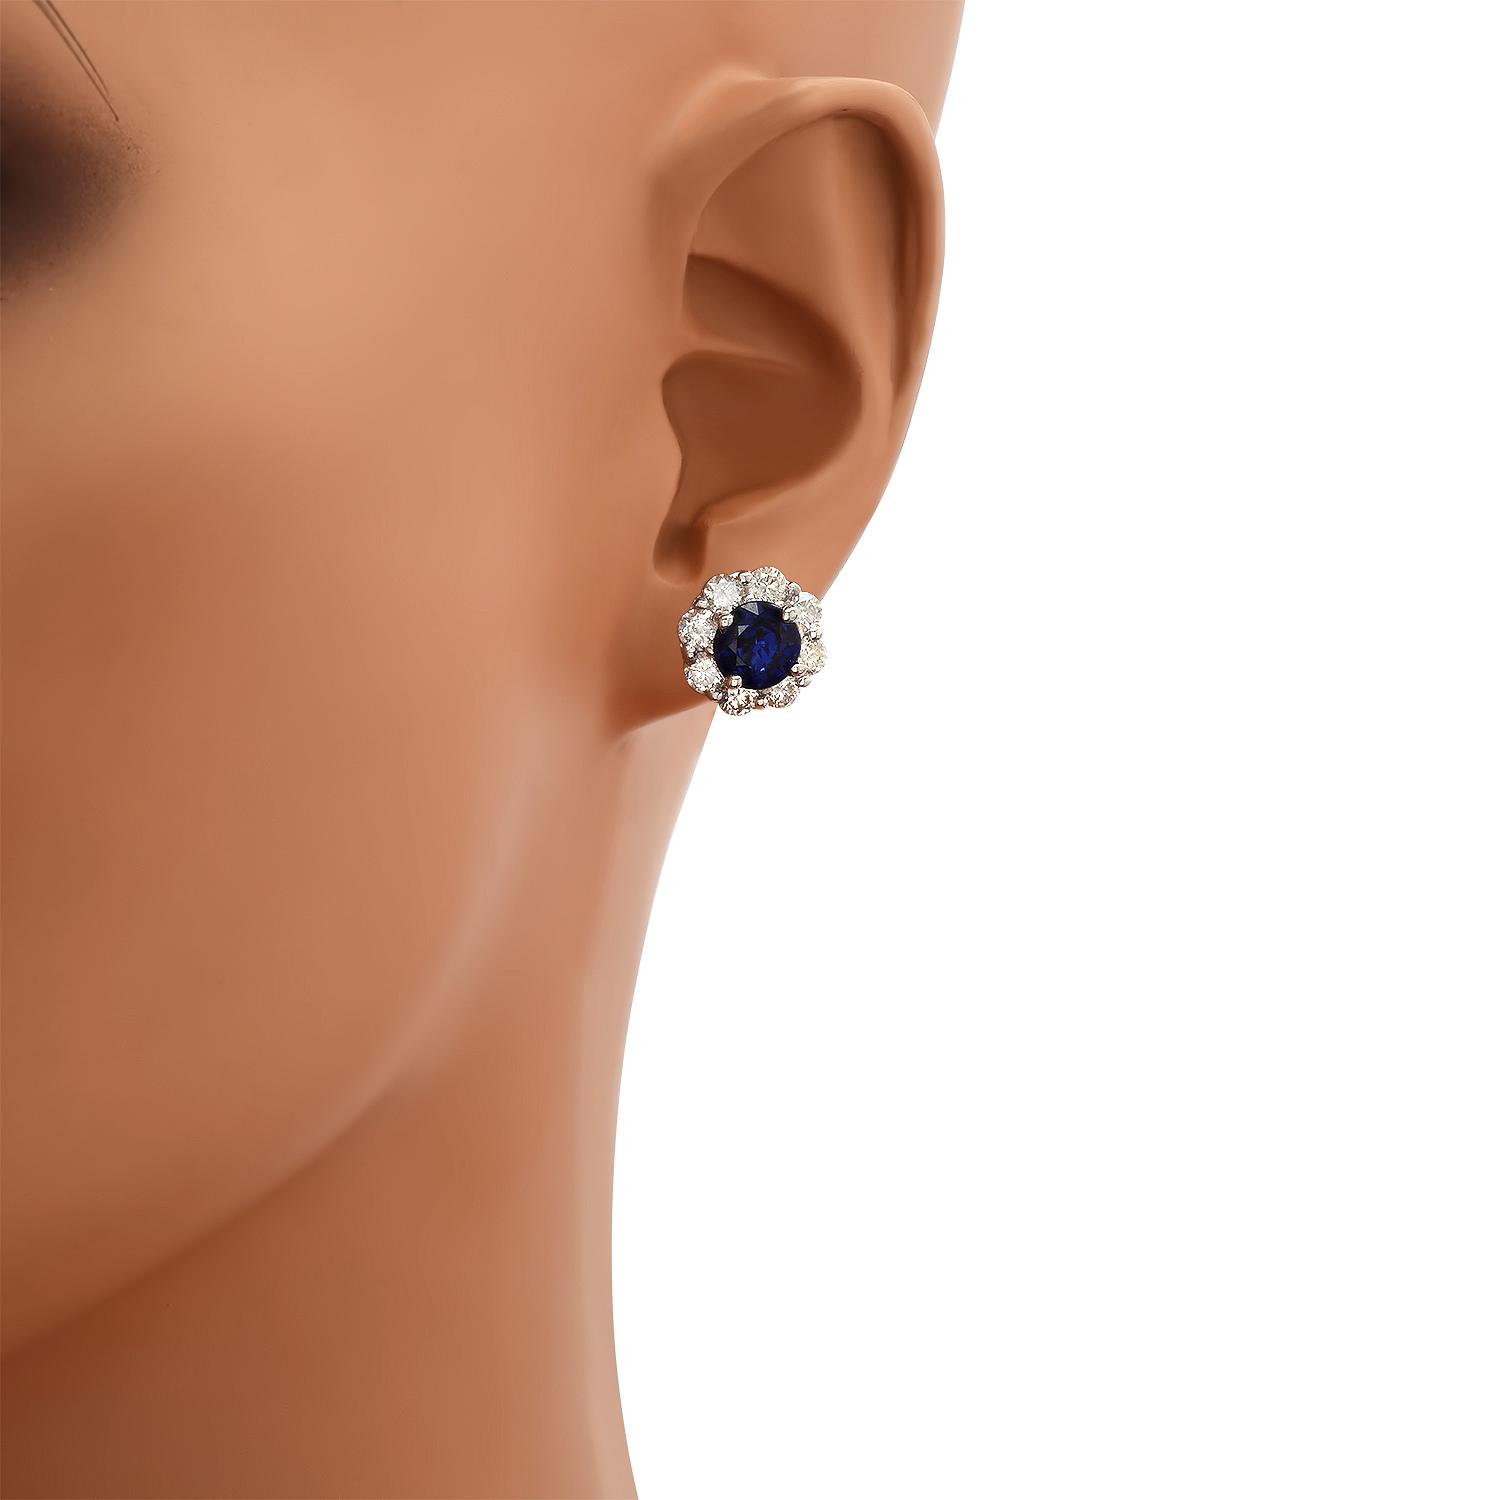 14K White Gold Setting with 1.01ct Sapphire and 0.68ct Diamond Earrings